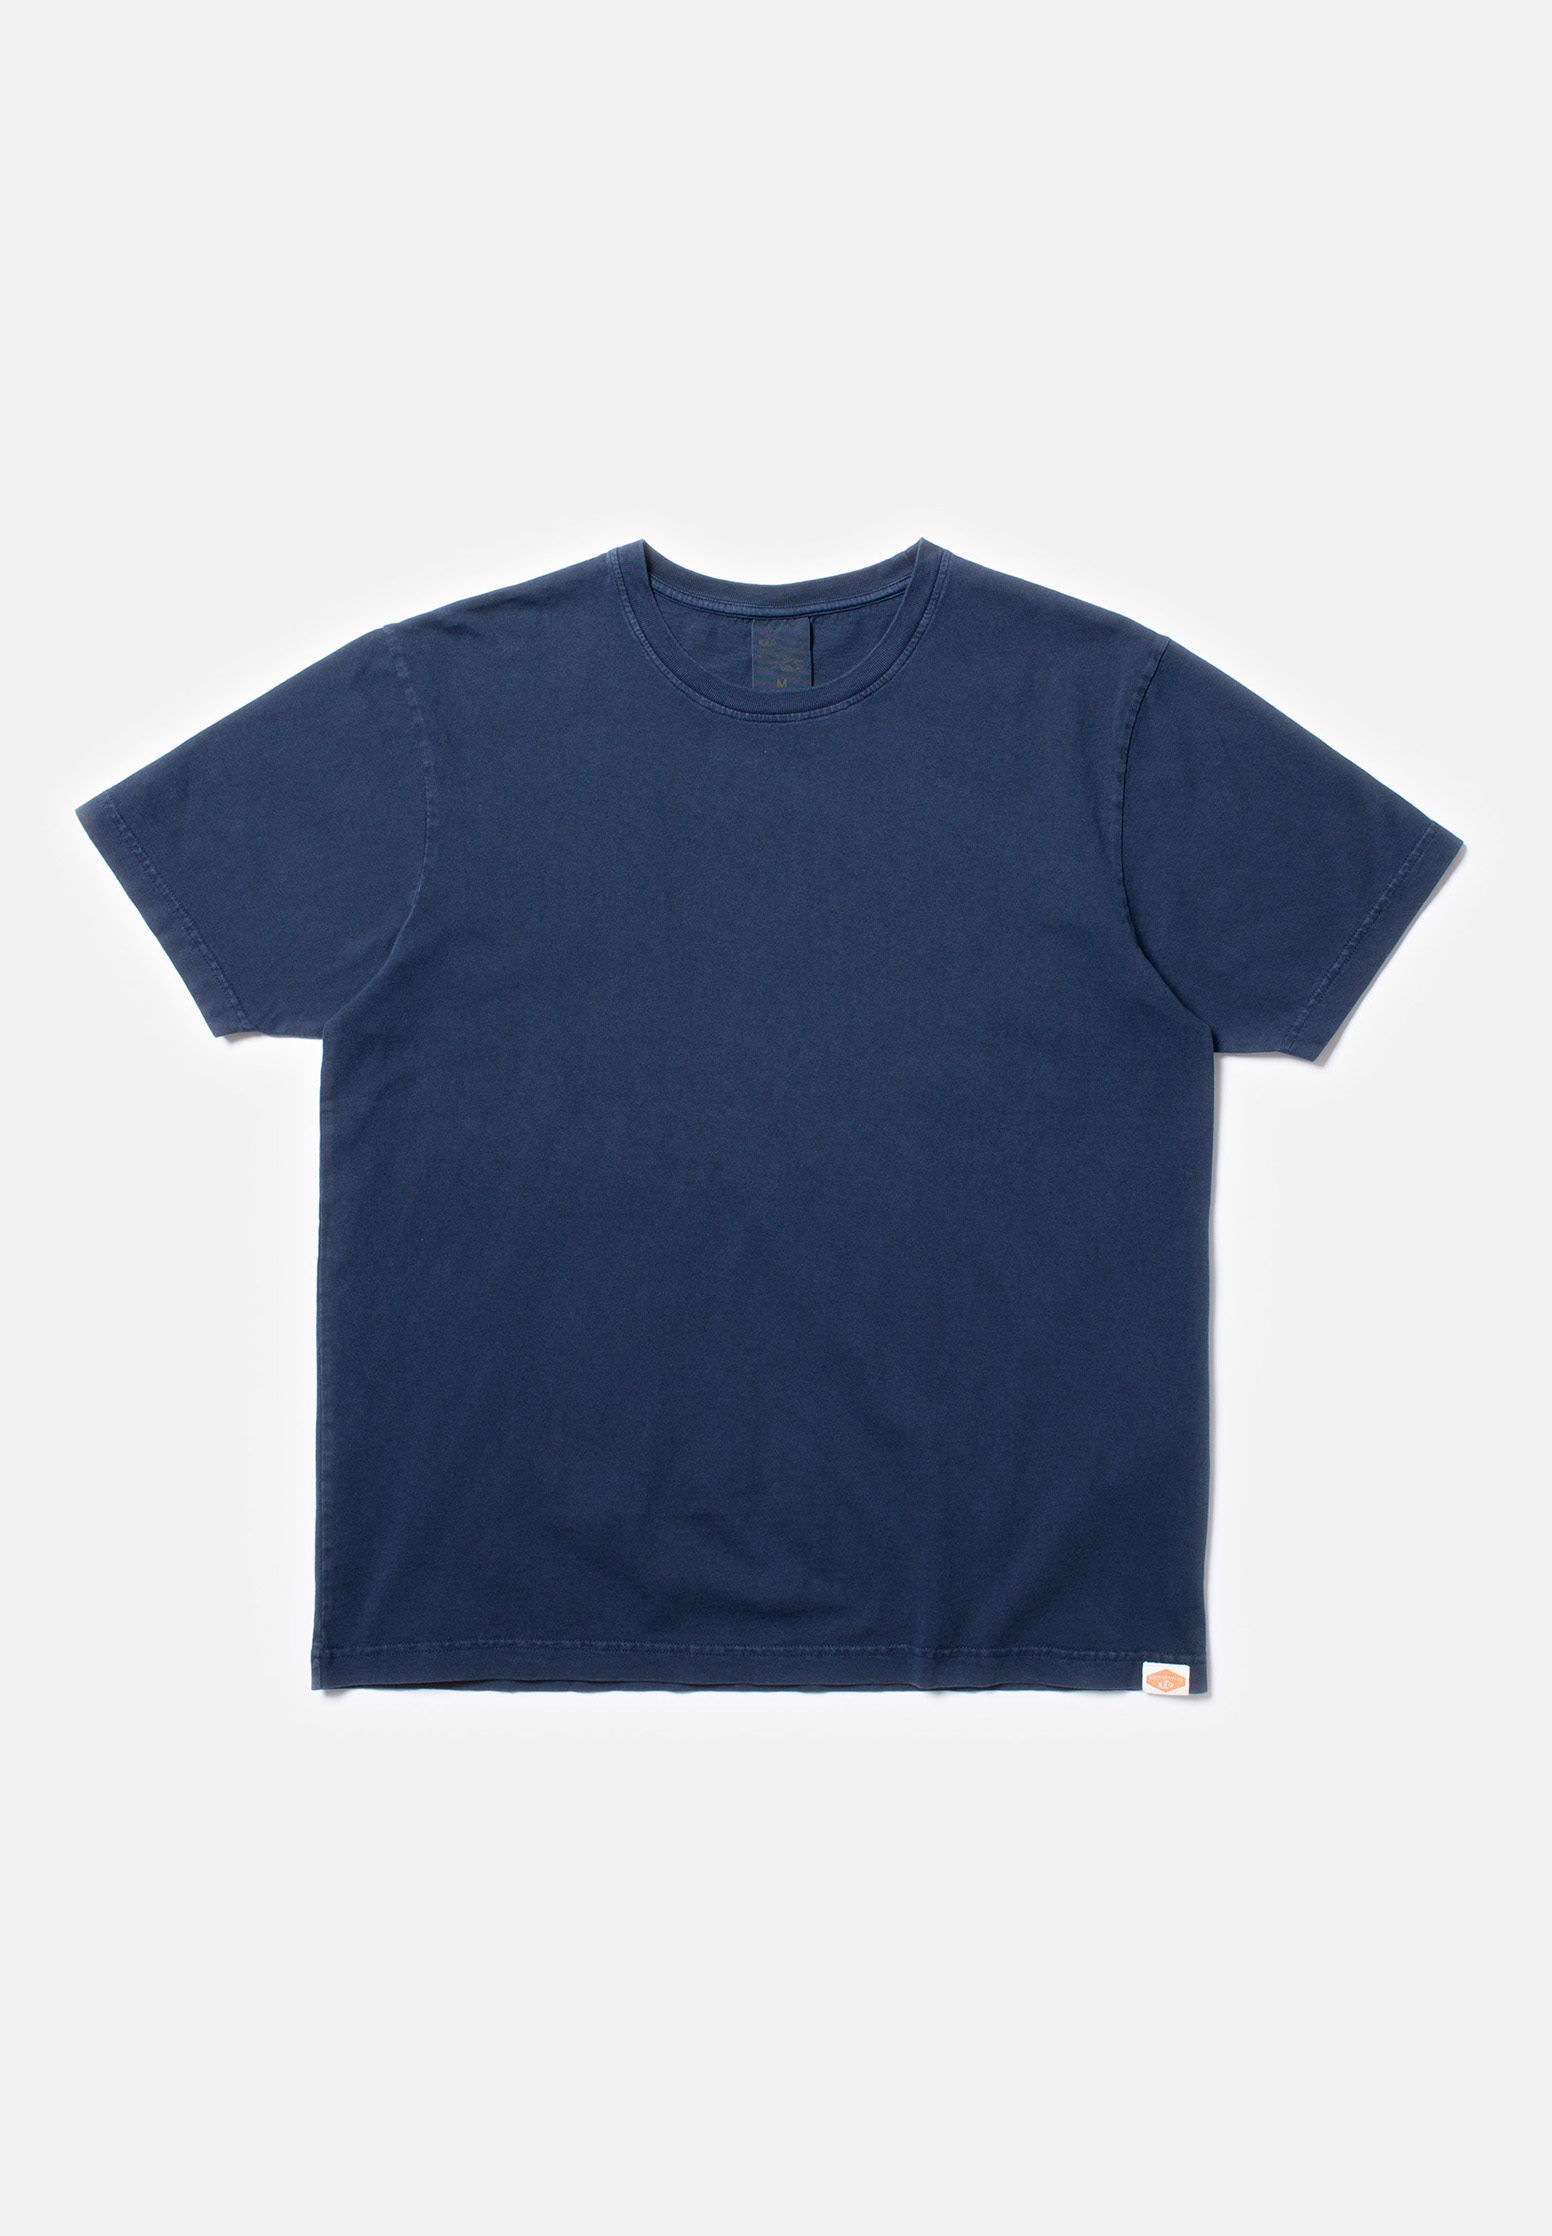 NUDIE JEANS T-Shirt Uno Everyday Tee blue S